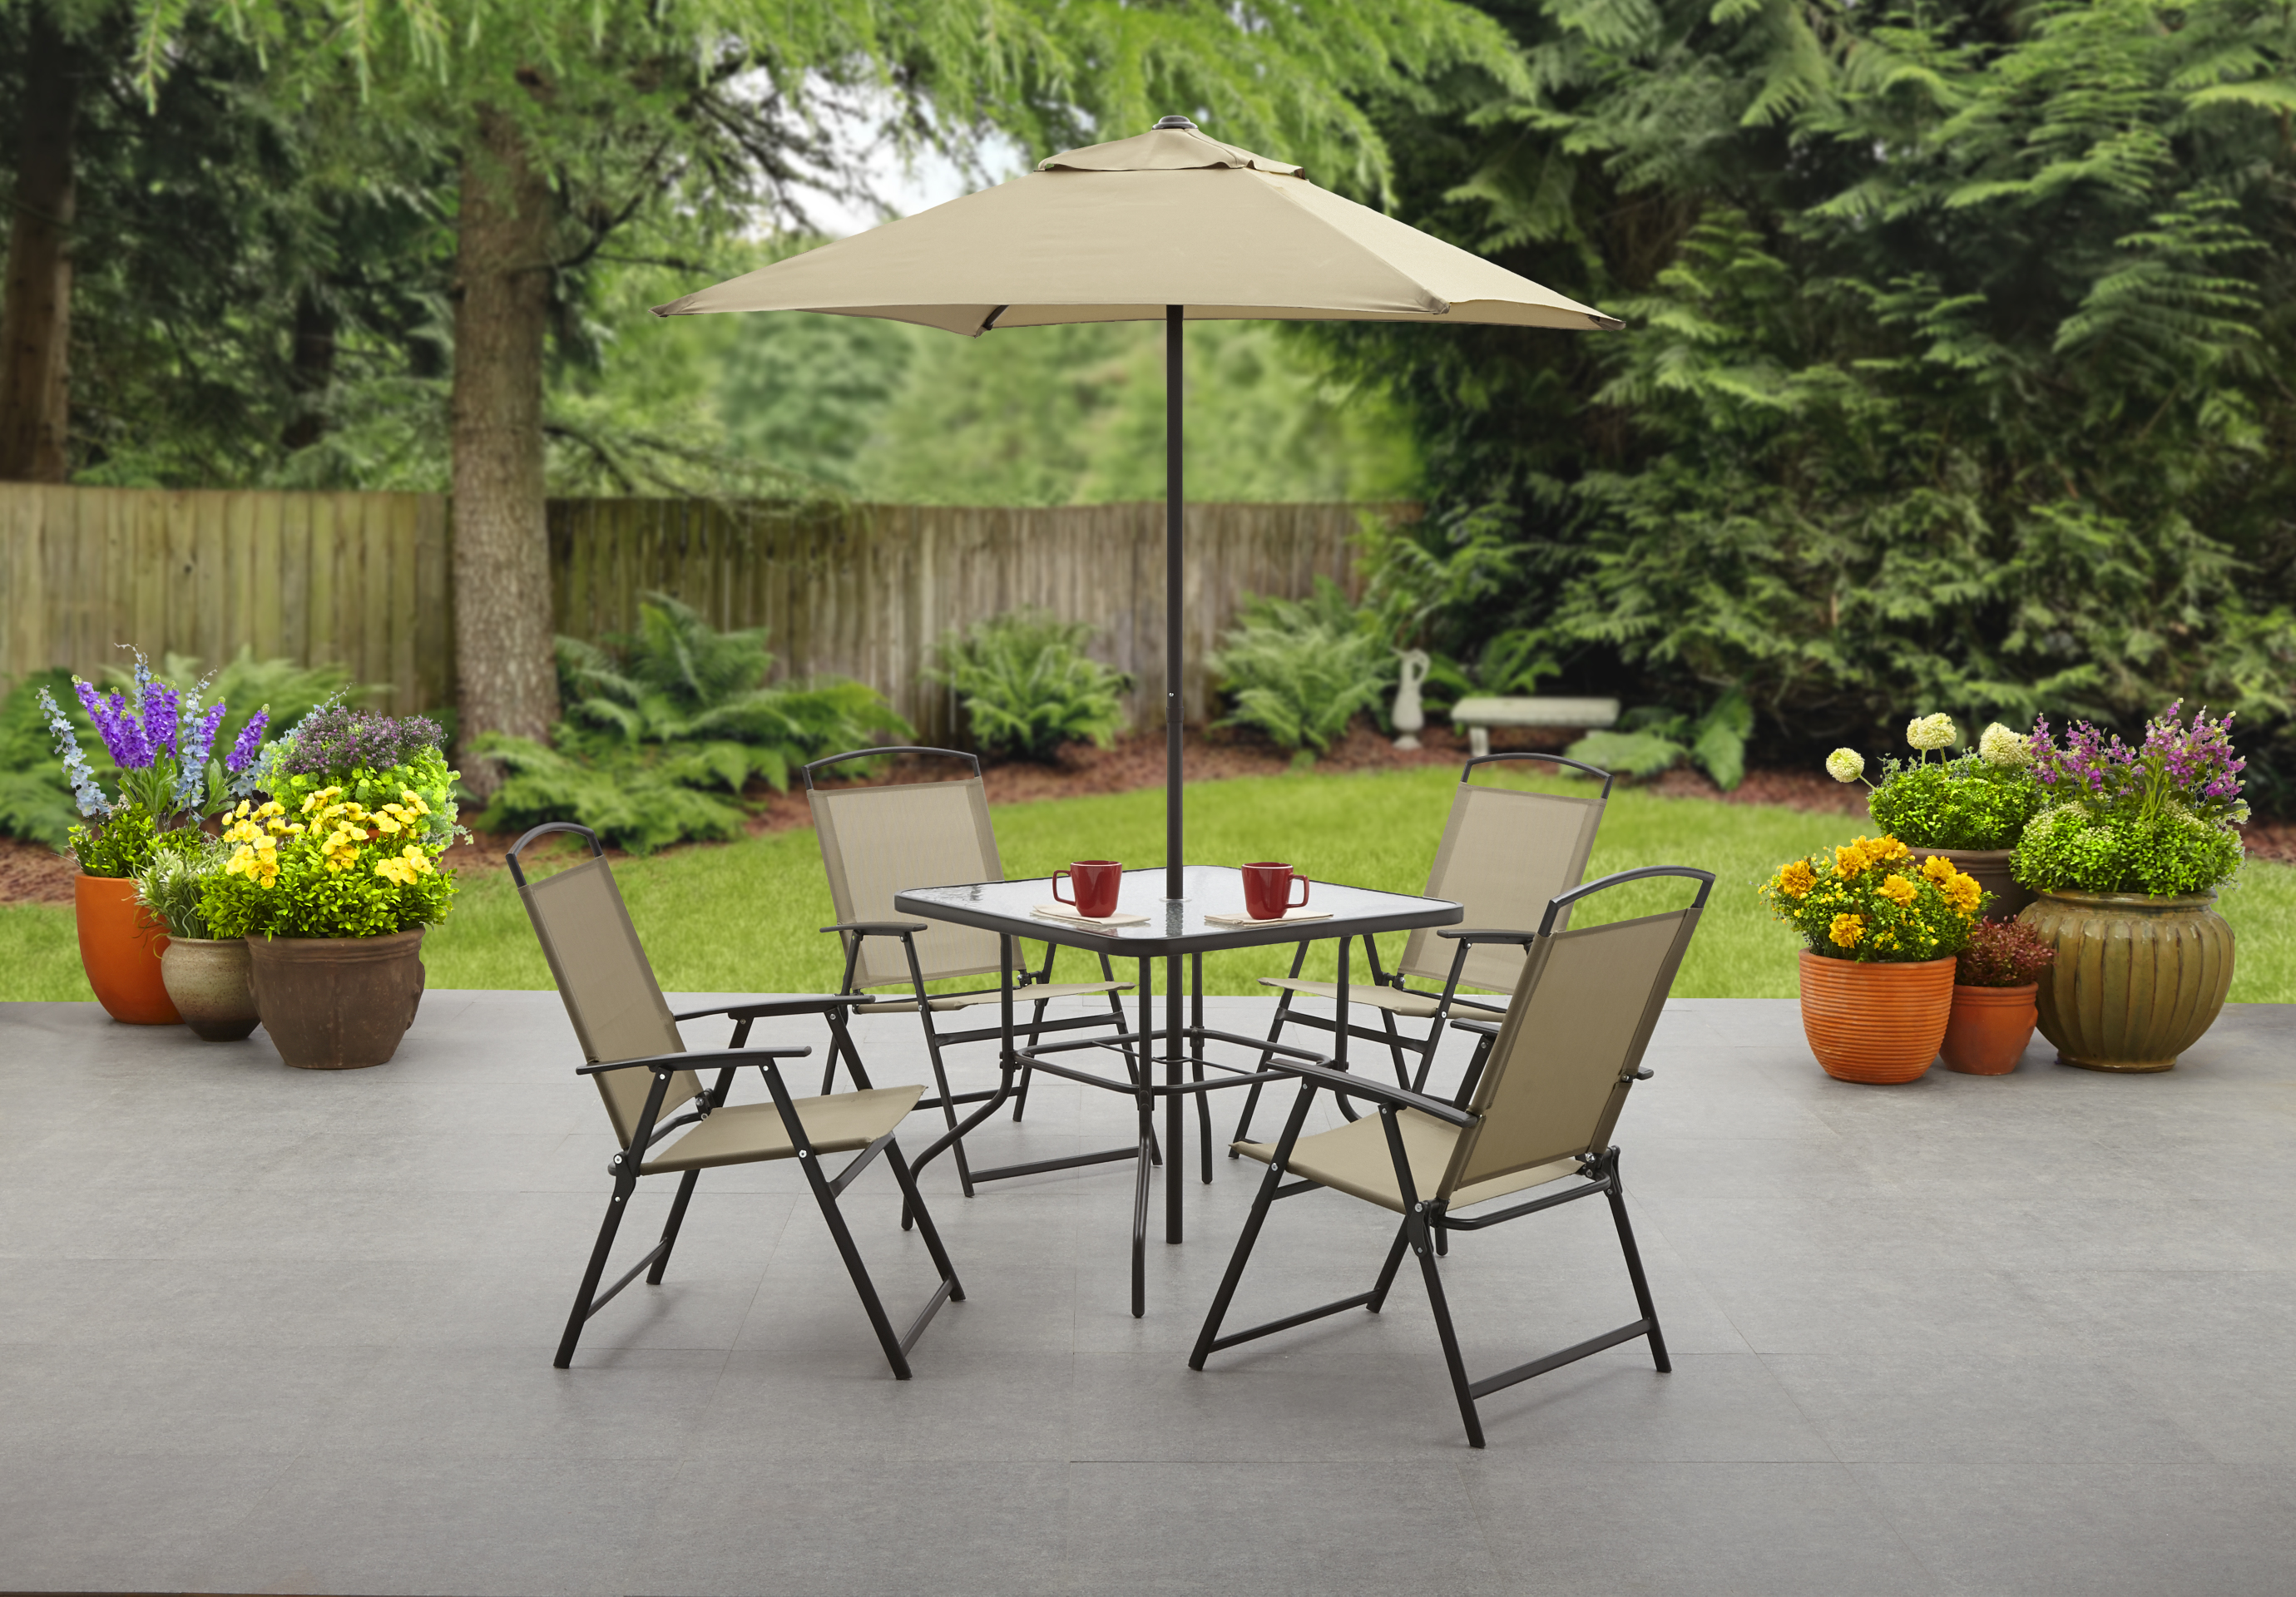 Mainstays Albany Lane Steel Outdoor Patio Dining Set of 6, Tan - image 1 of 13